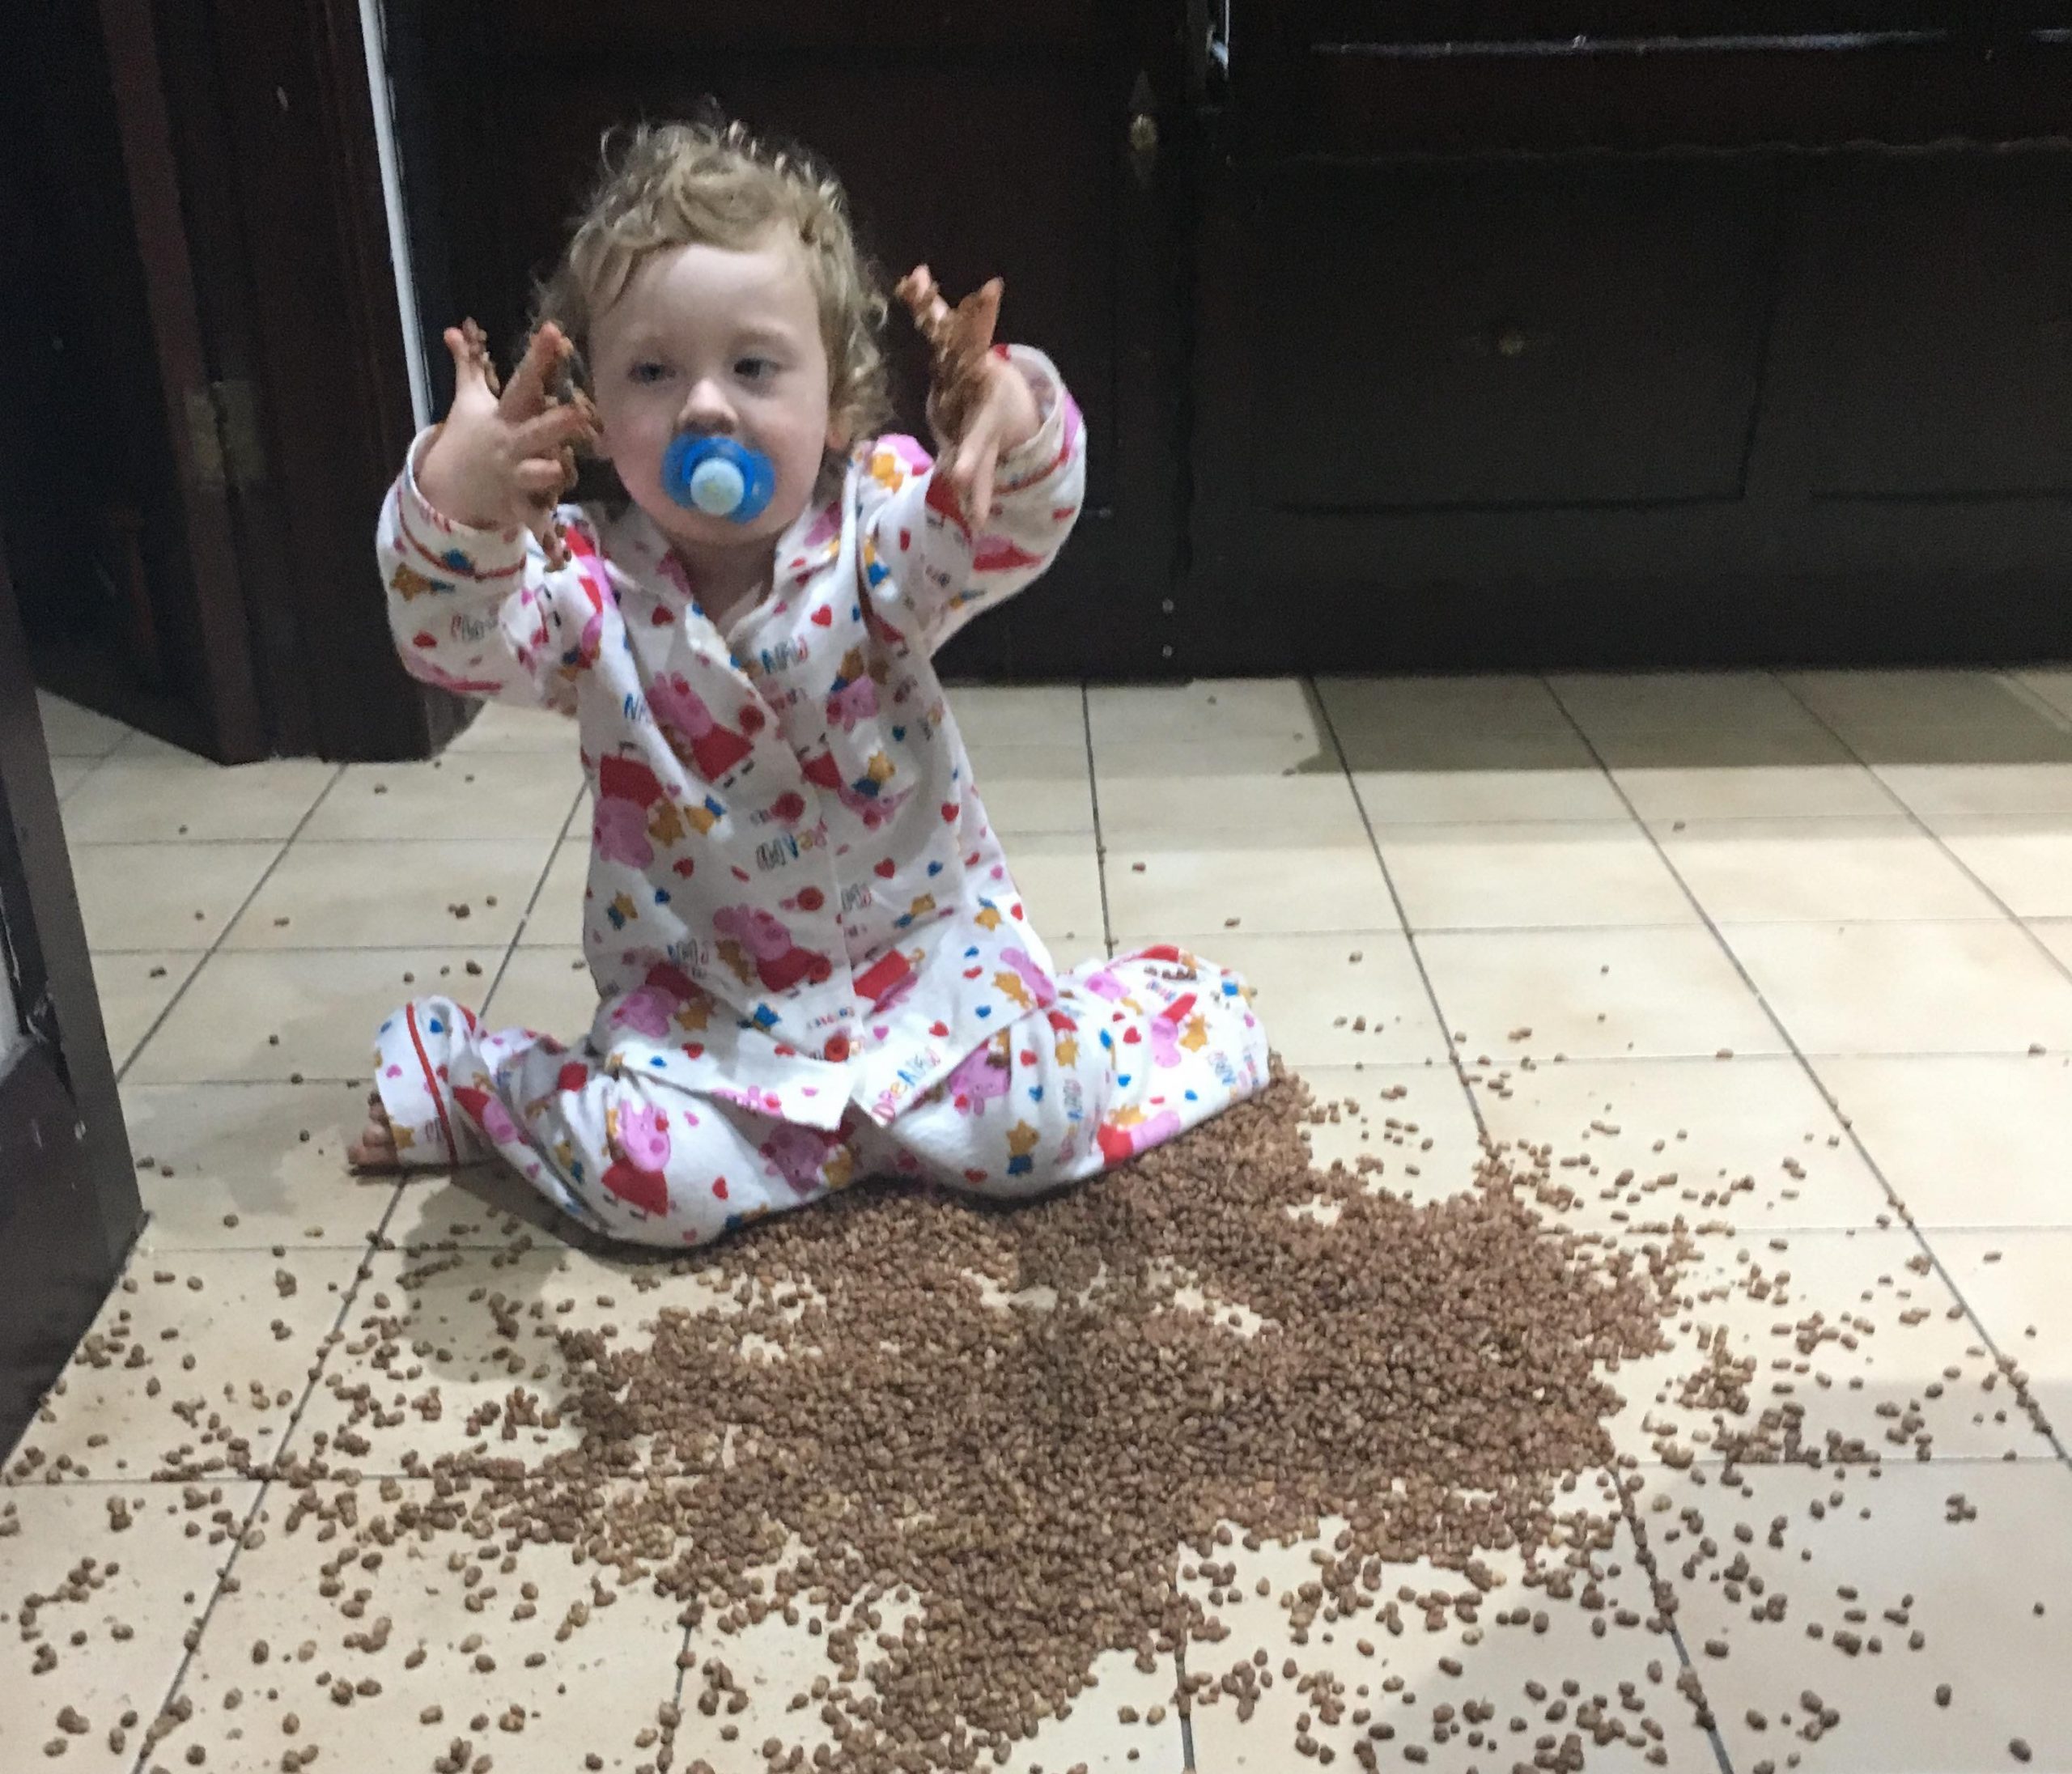 One-year-old Evelyn from Liverpool was feeling a bit peckish, so helped herself to cereal. She was extra careful in making sure she distributed the cereal all over the floor.